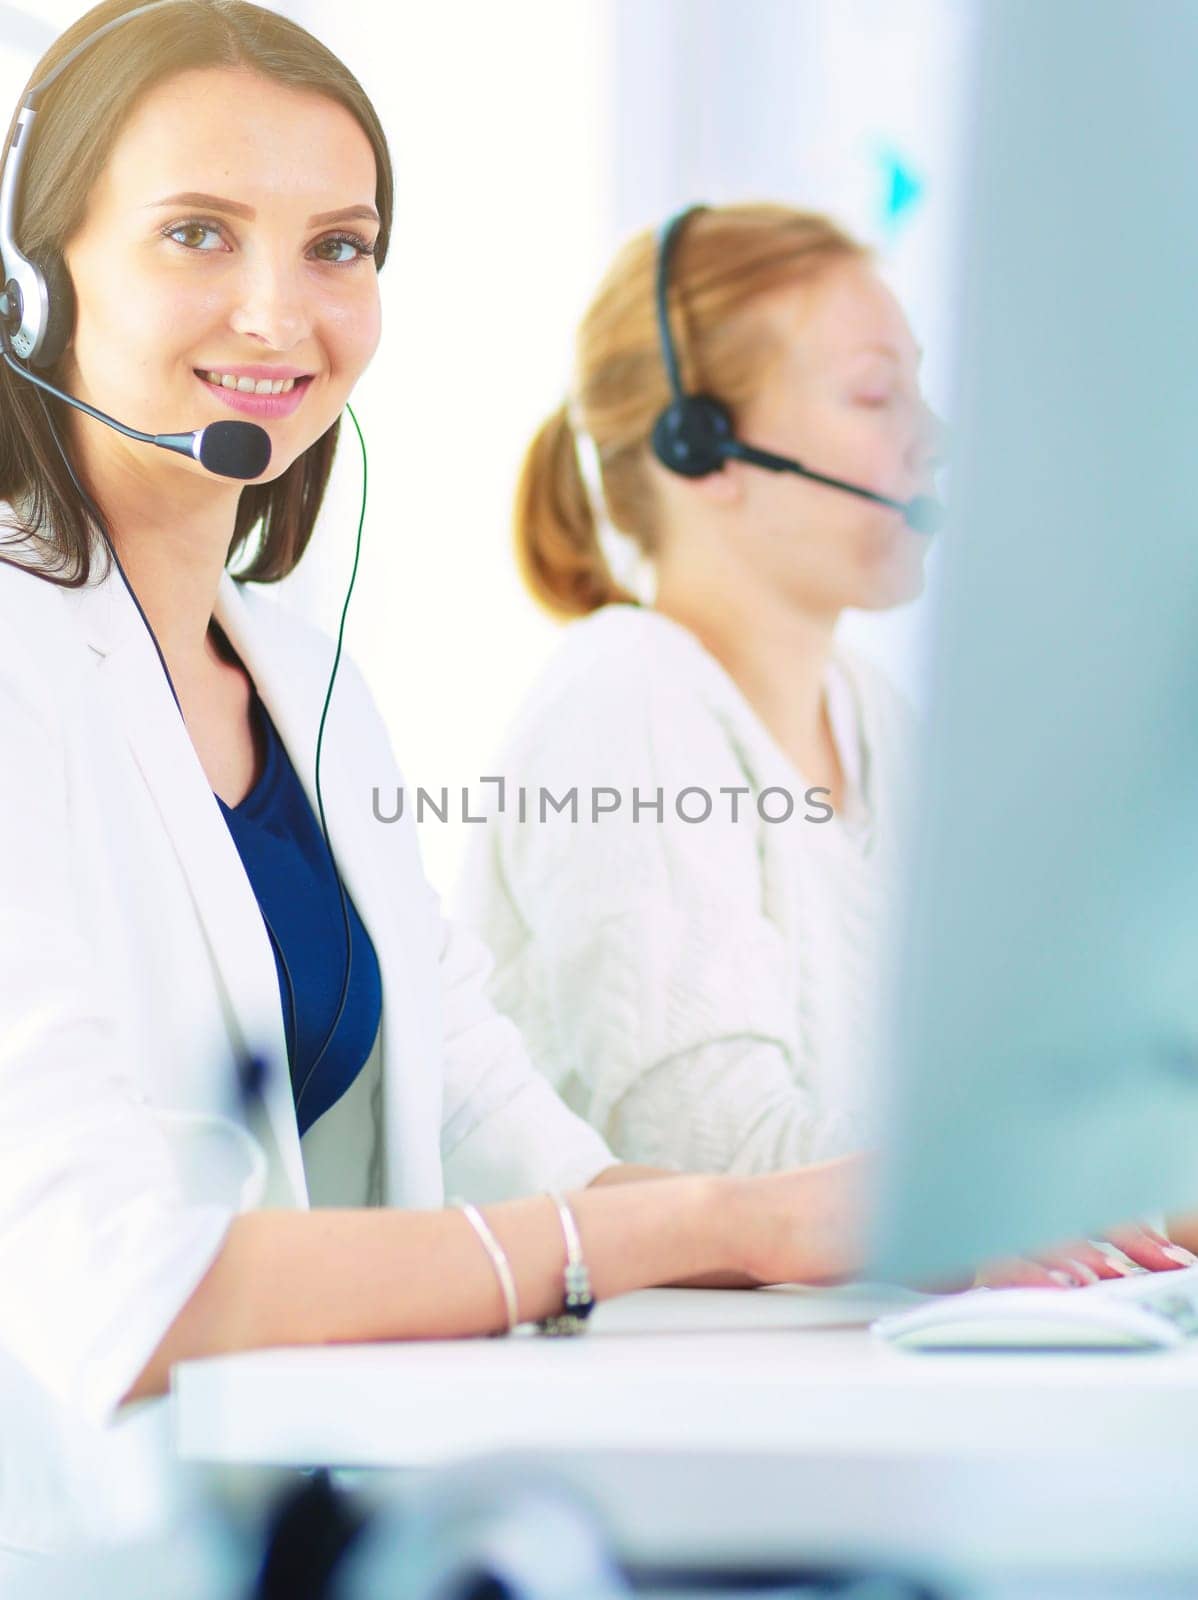 Smiling businesswoman or helpline operator with headset and computer at office.